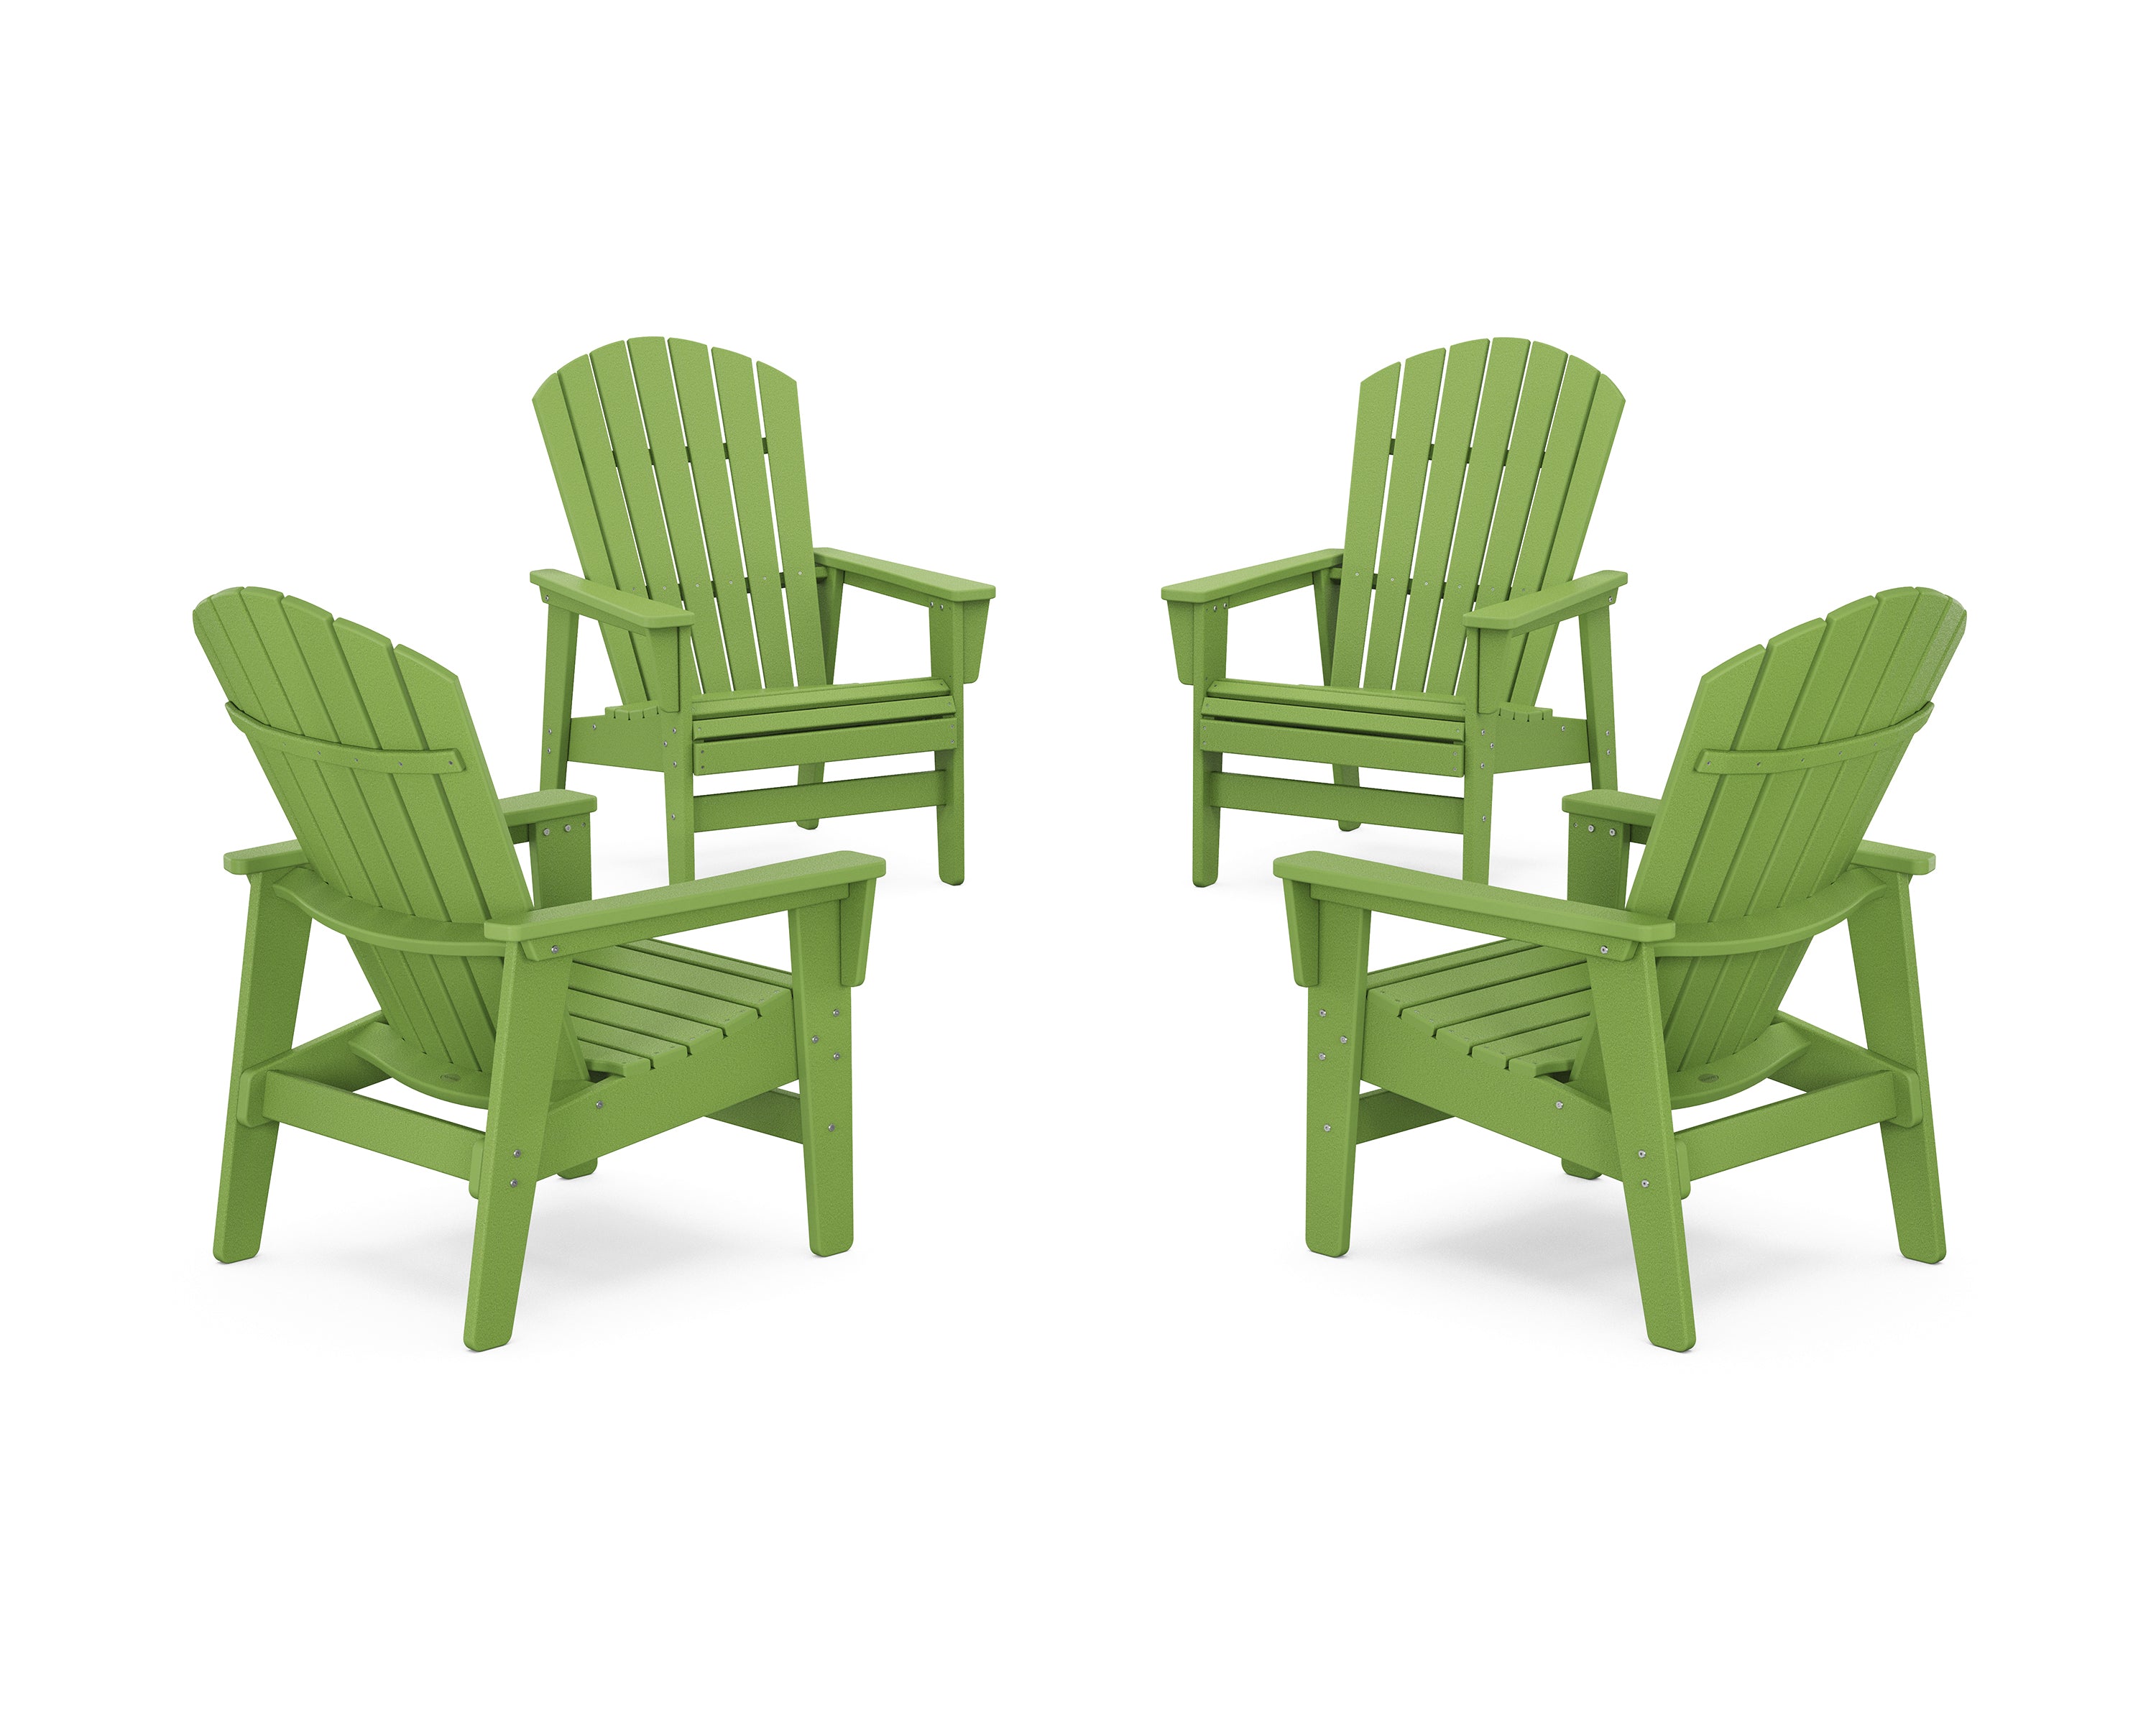 POLYWOOD® 4-Piece Nautical Grand Upright Adirondack Chair Conversation Set in Lime